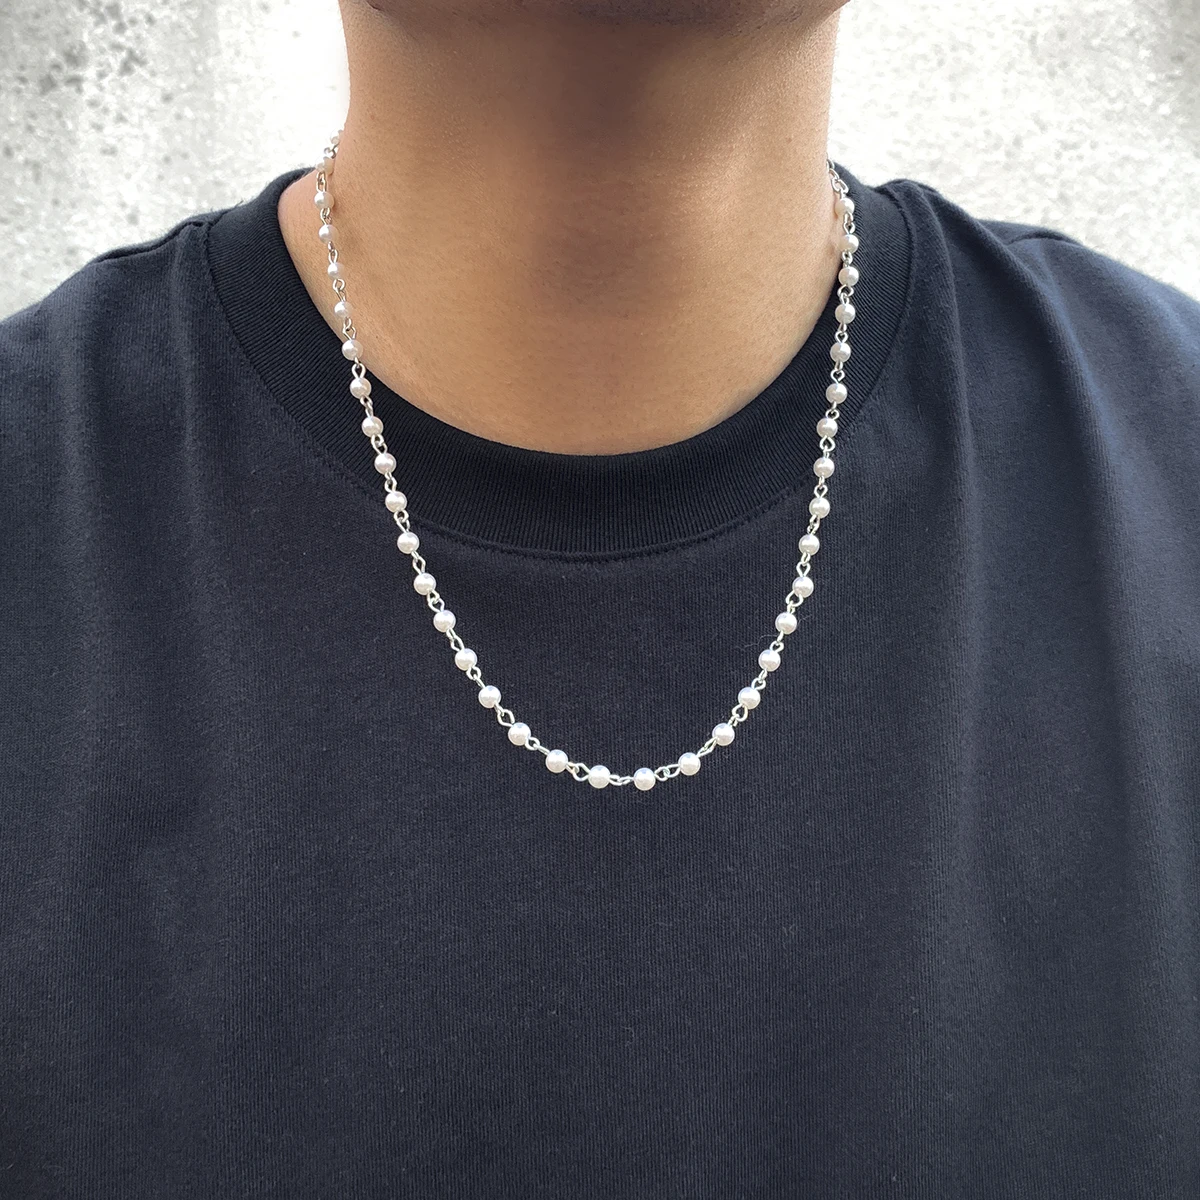 New Fashion Punk Minimalism Statement Short Collar Clavicle Chain Necklace For Men Exquisite Small Simulated Pearls Jewelry Gift